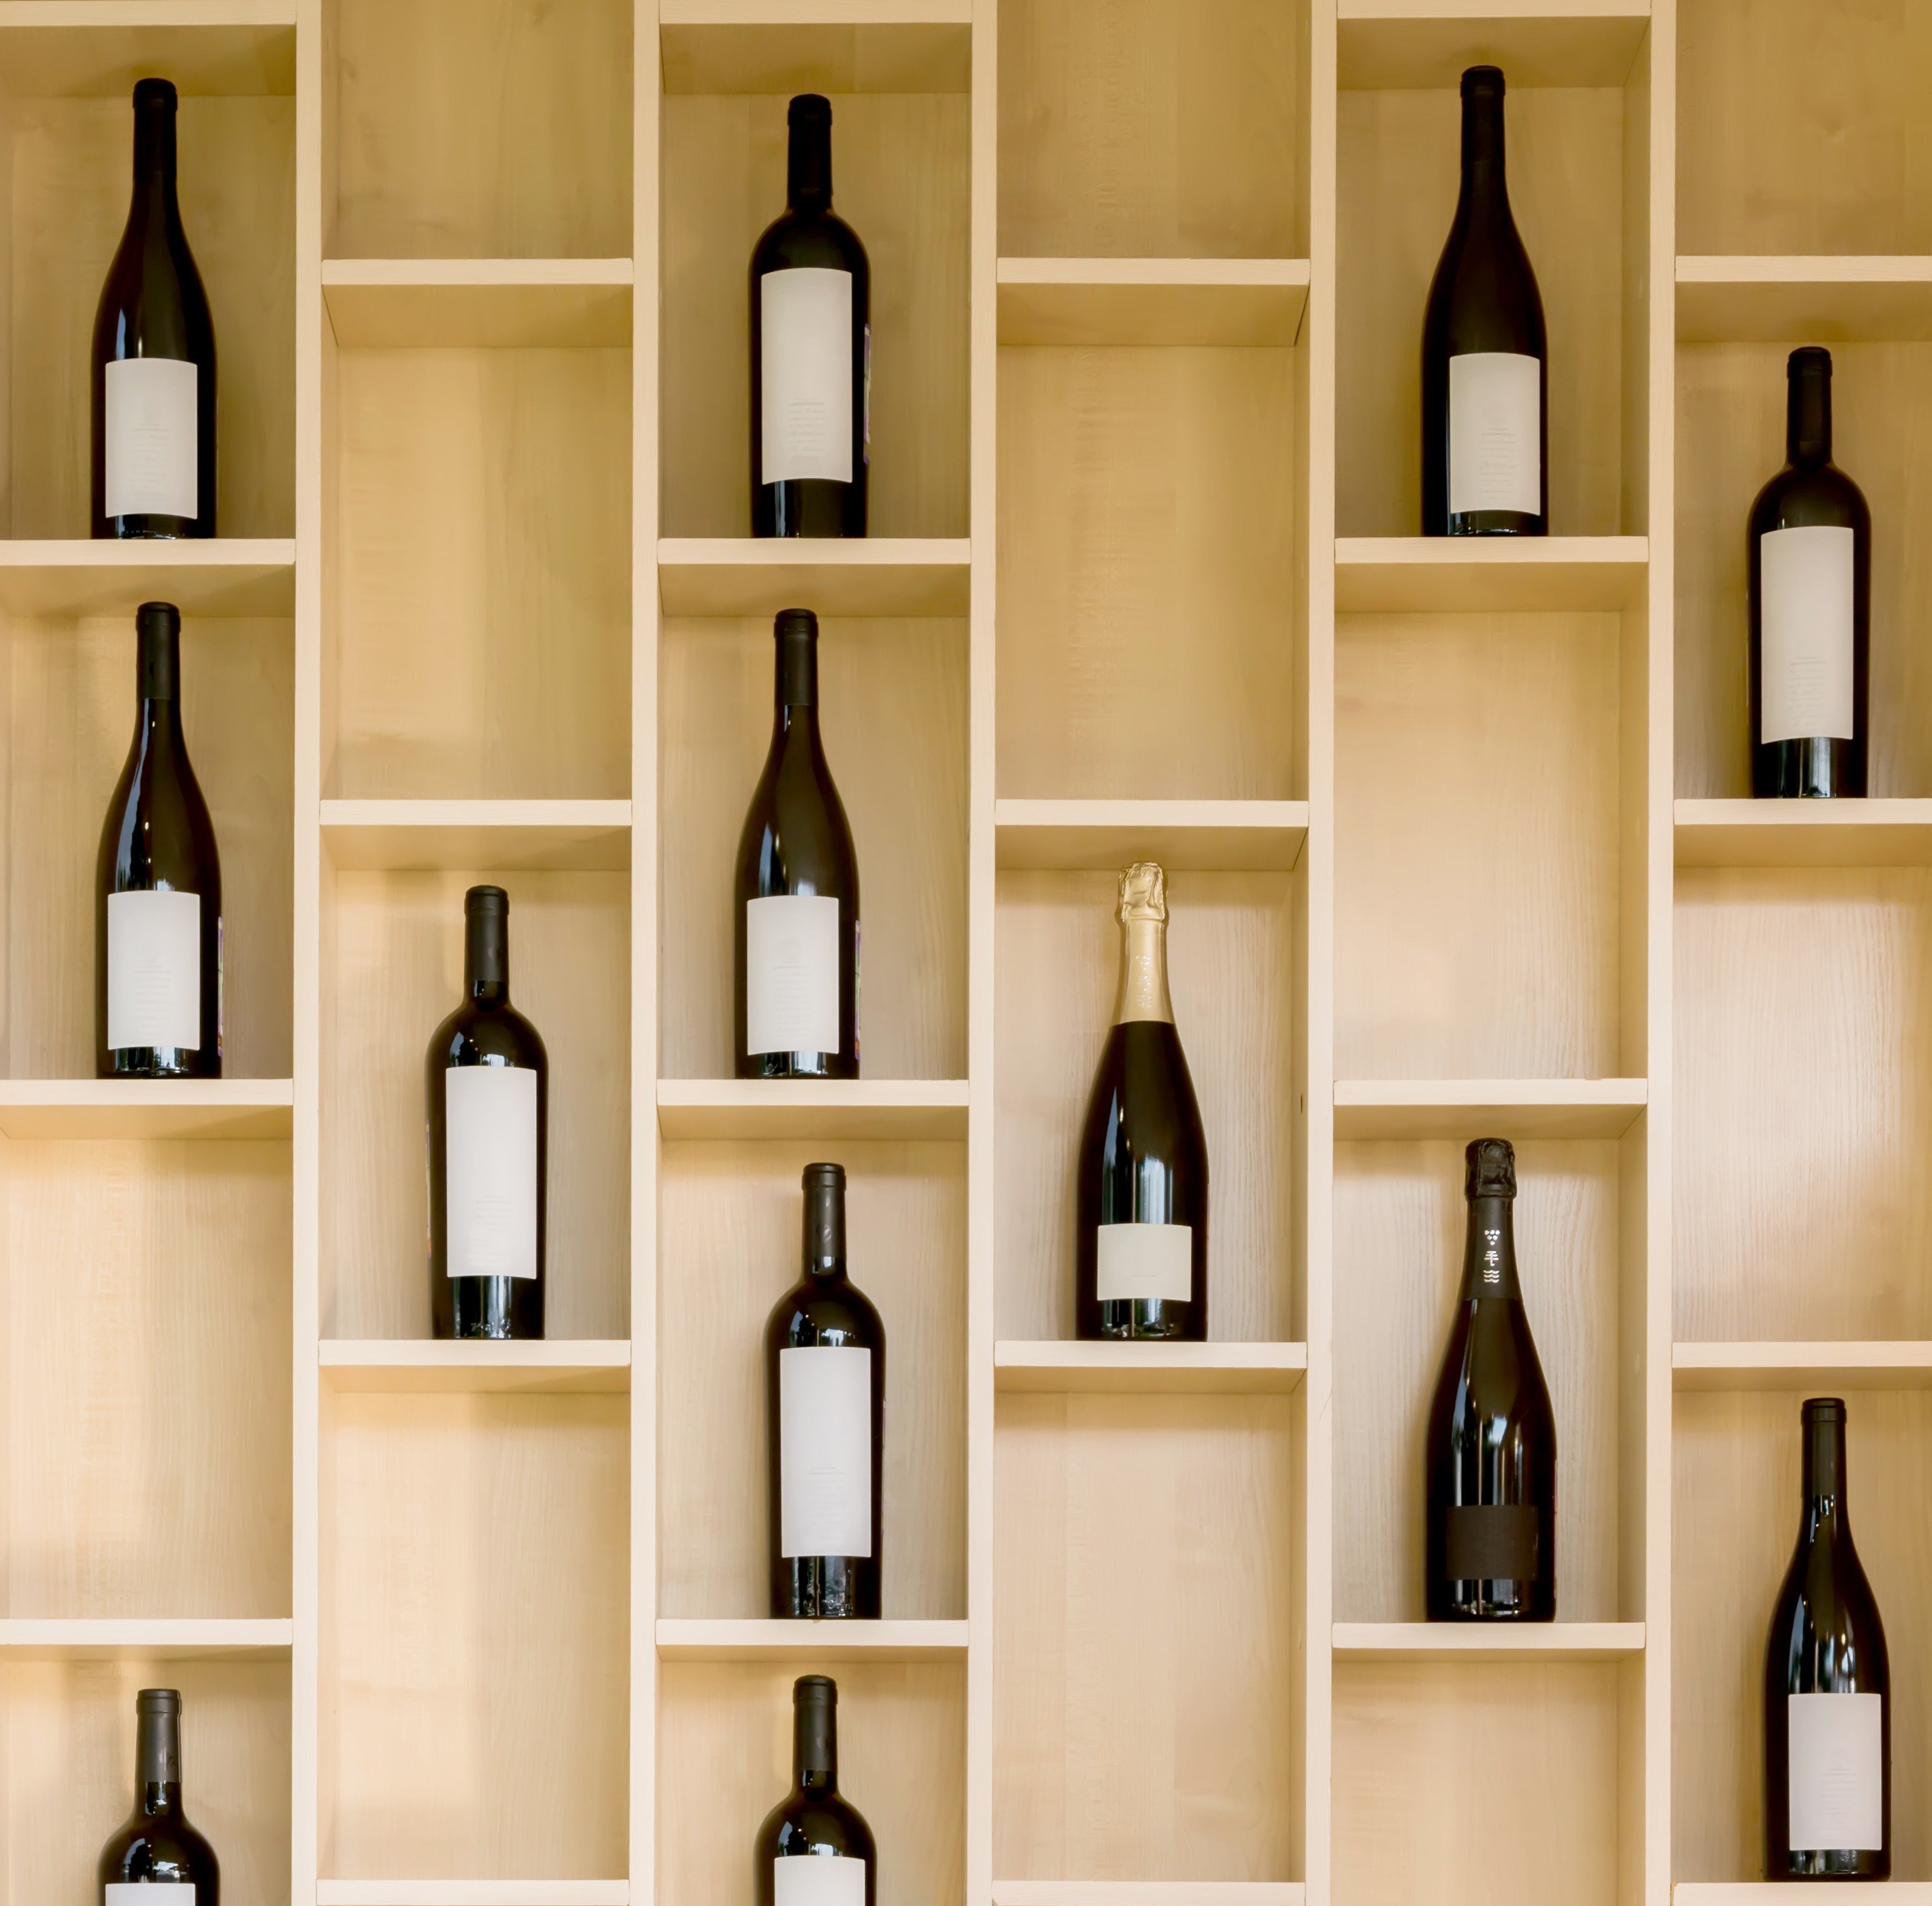 Home organisation should stretch to your cellar, regardless of how much space you have. Photo: Shutterstock